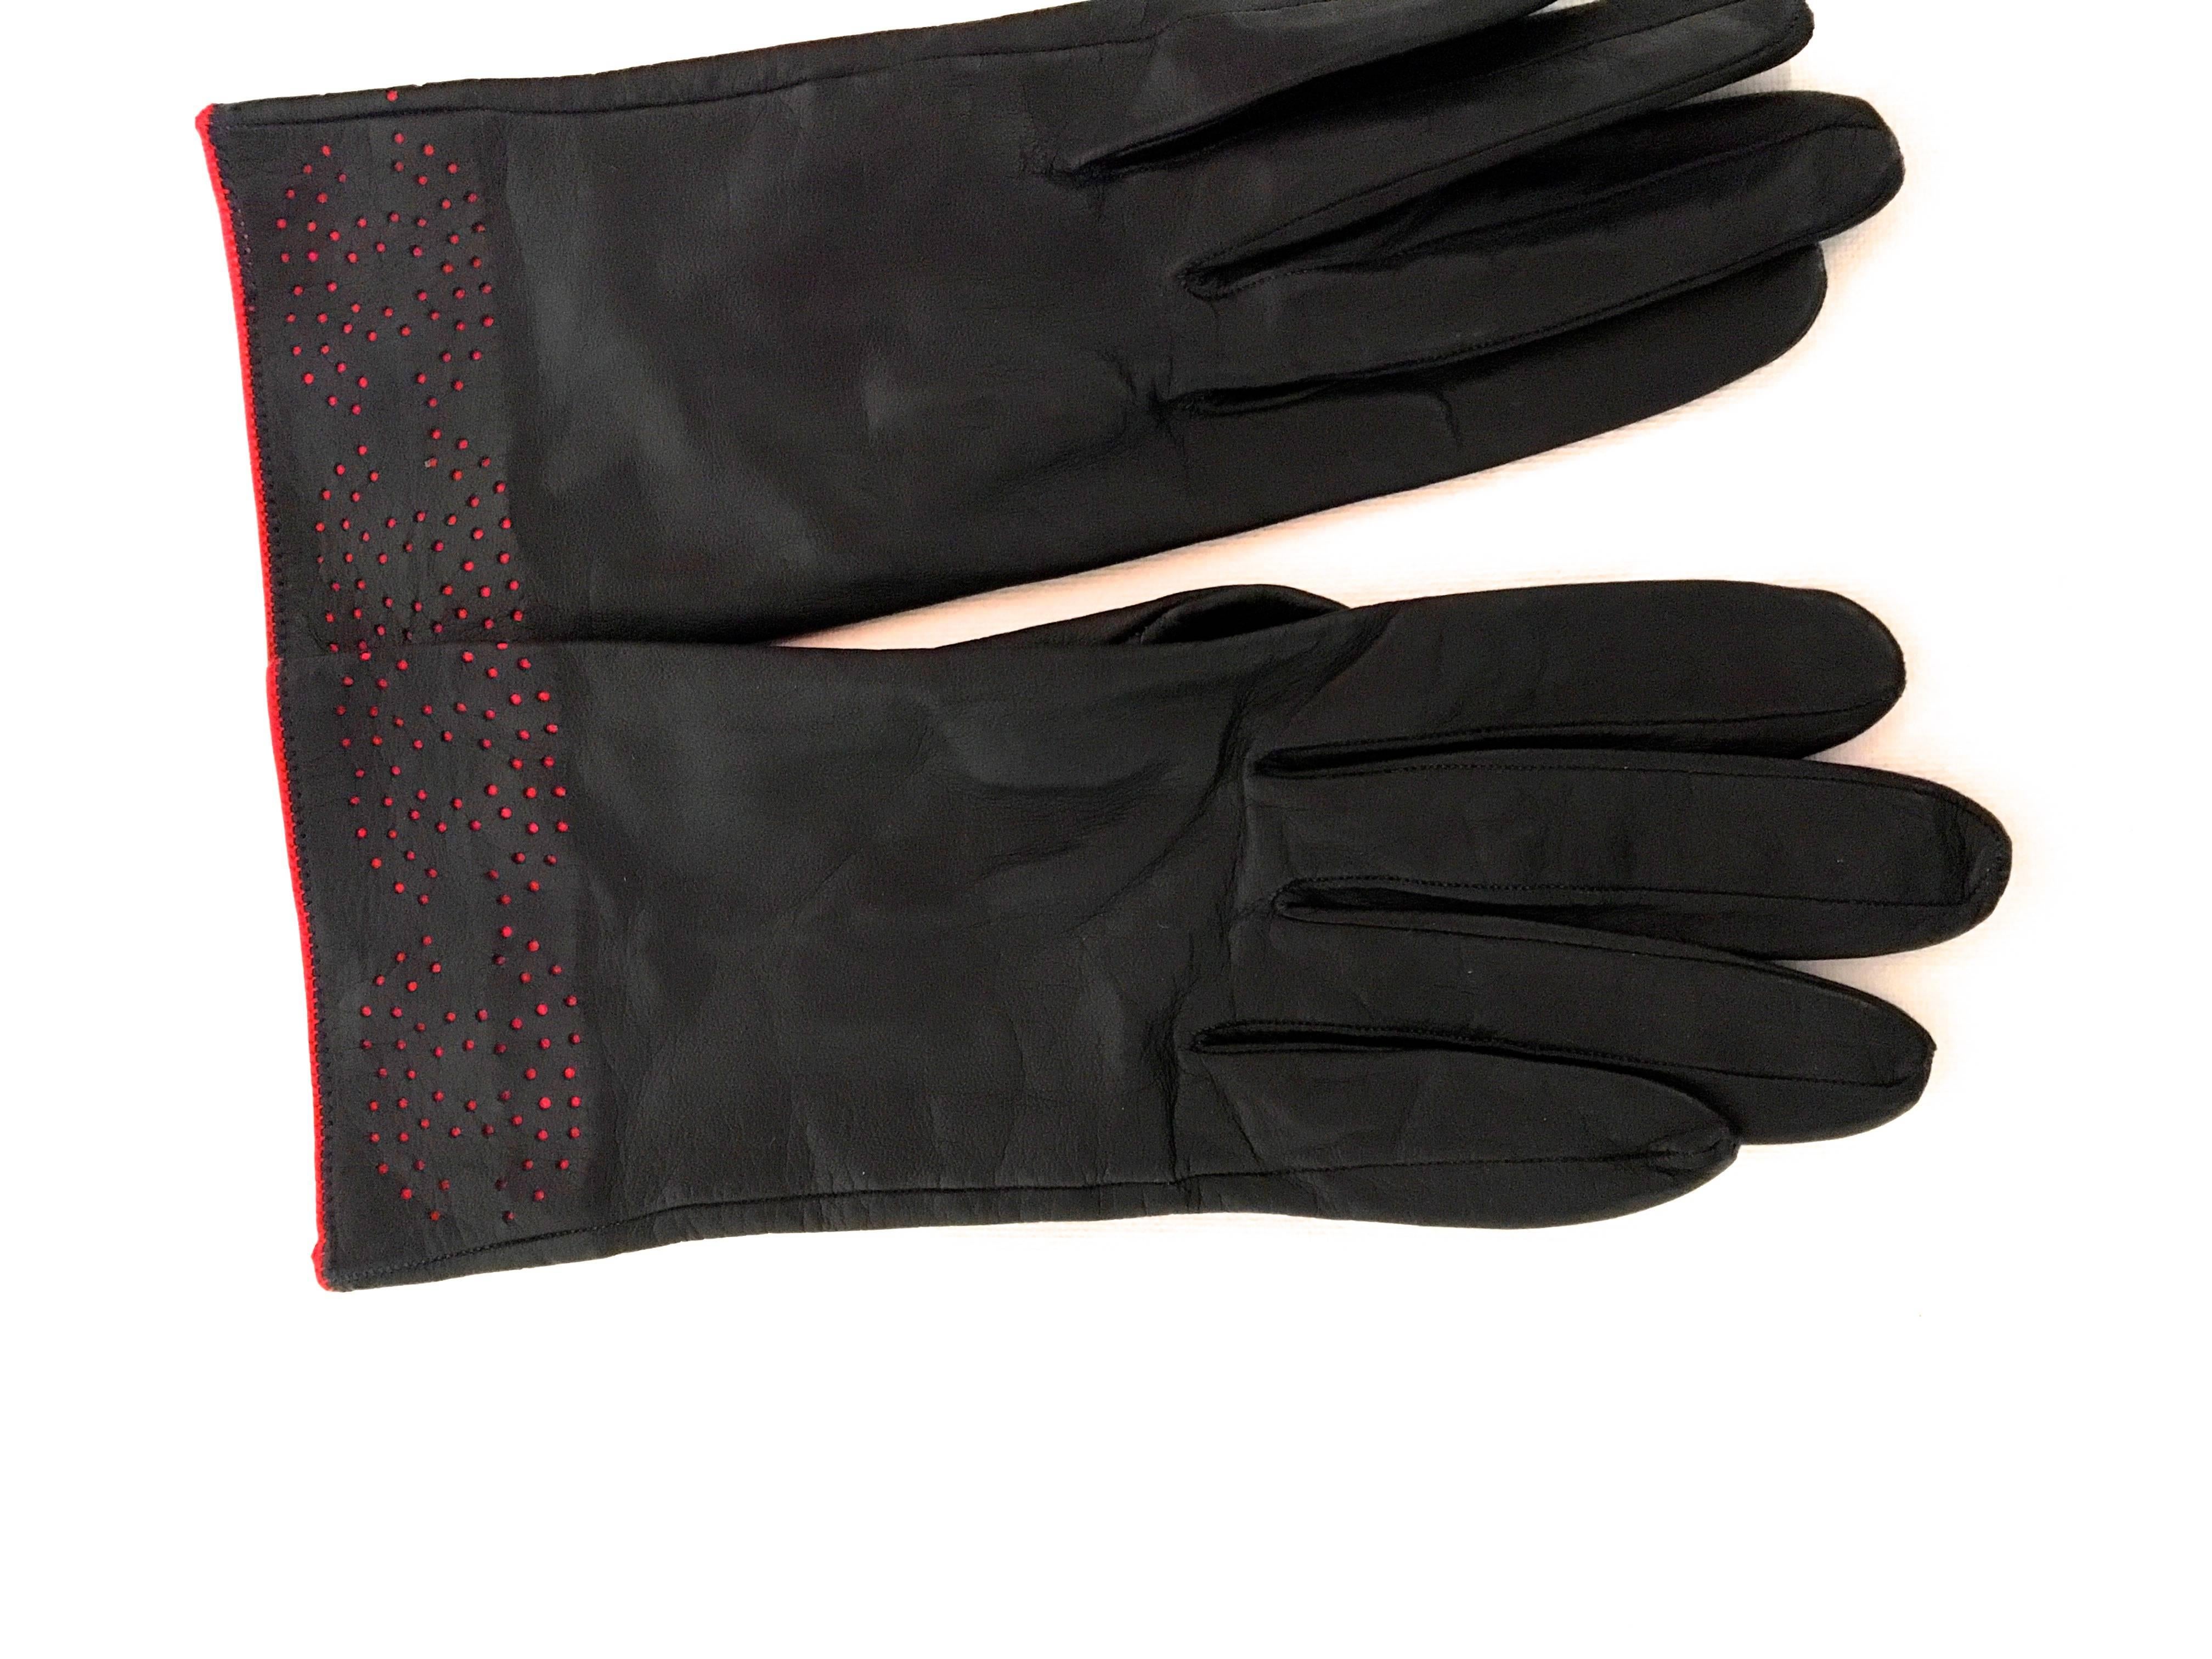 Presented here is a beautiful pair of Chanel leather gloves. This fantastic pair of Chanel gloves is comprised of a rich navy blue leather with red trim along the seams. The Chanel CC logo is perforated into the gloves. The total length of this pair